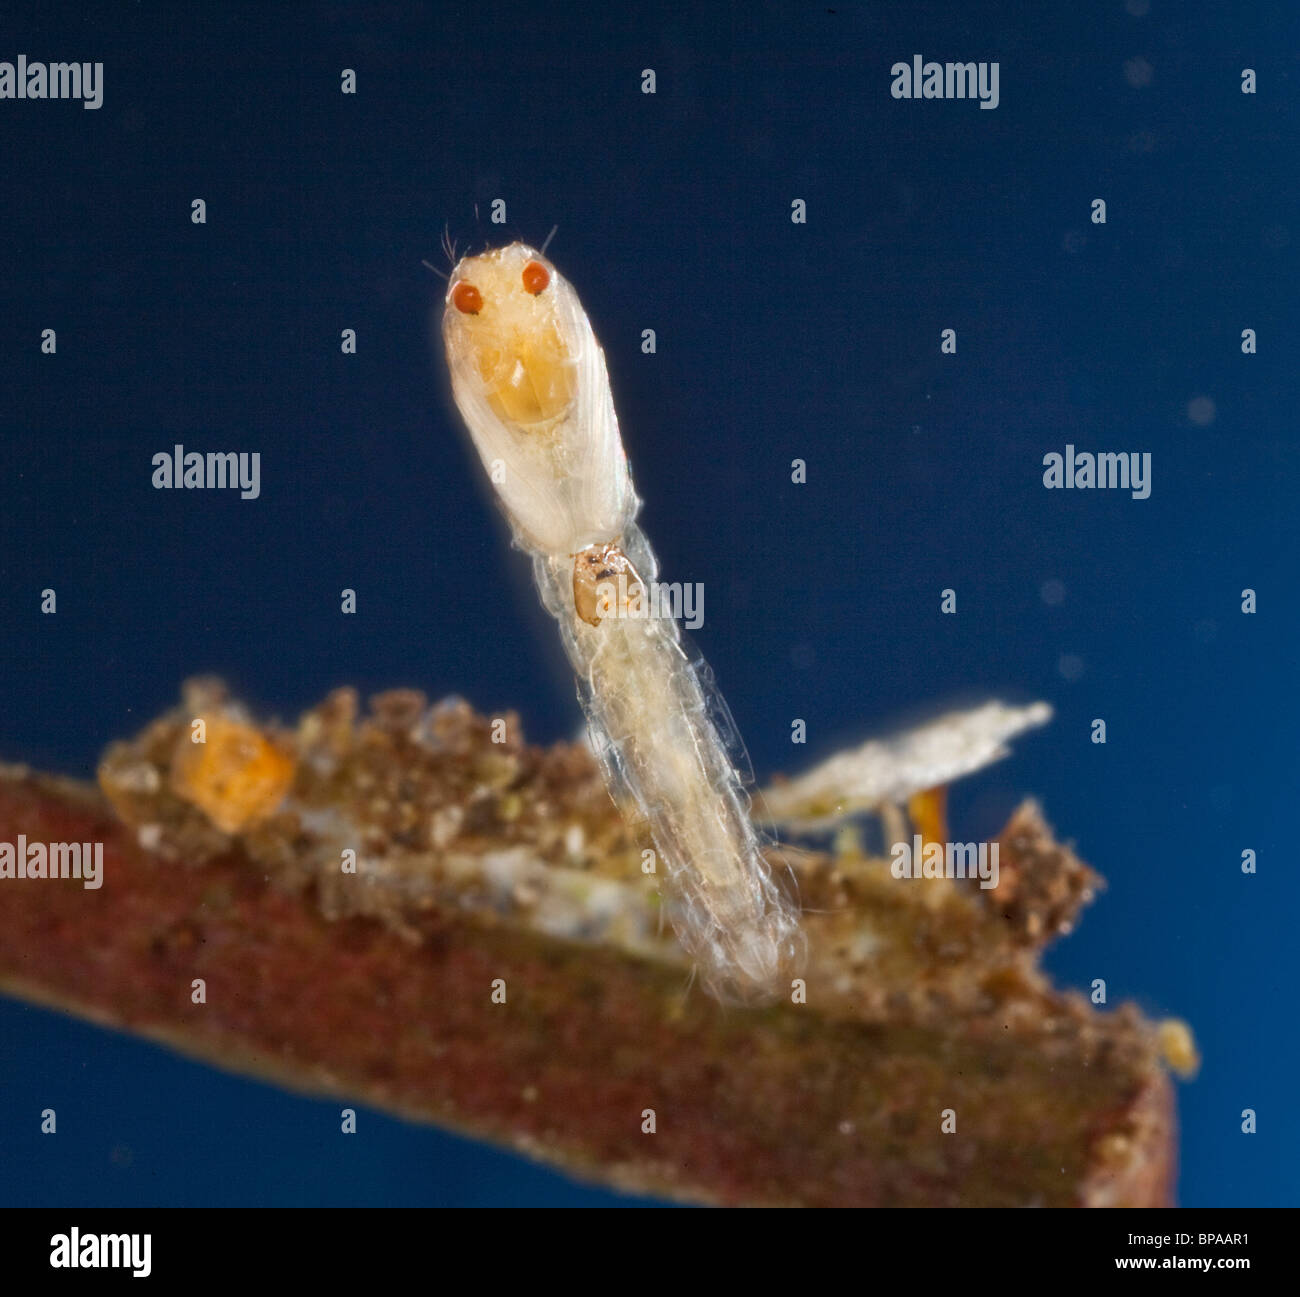 Macro close-up of midge pupa stage floating in water before hatching Stock Photo